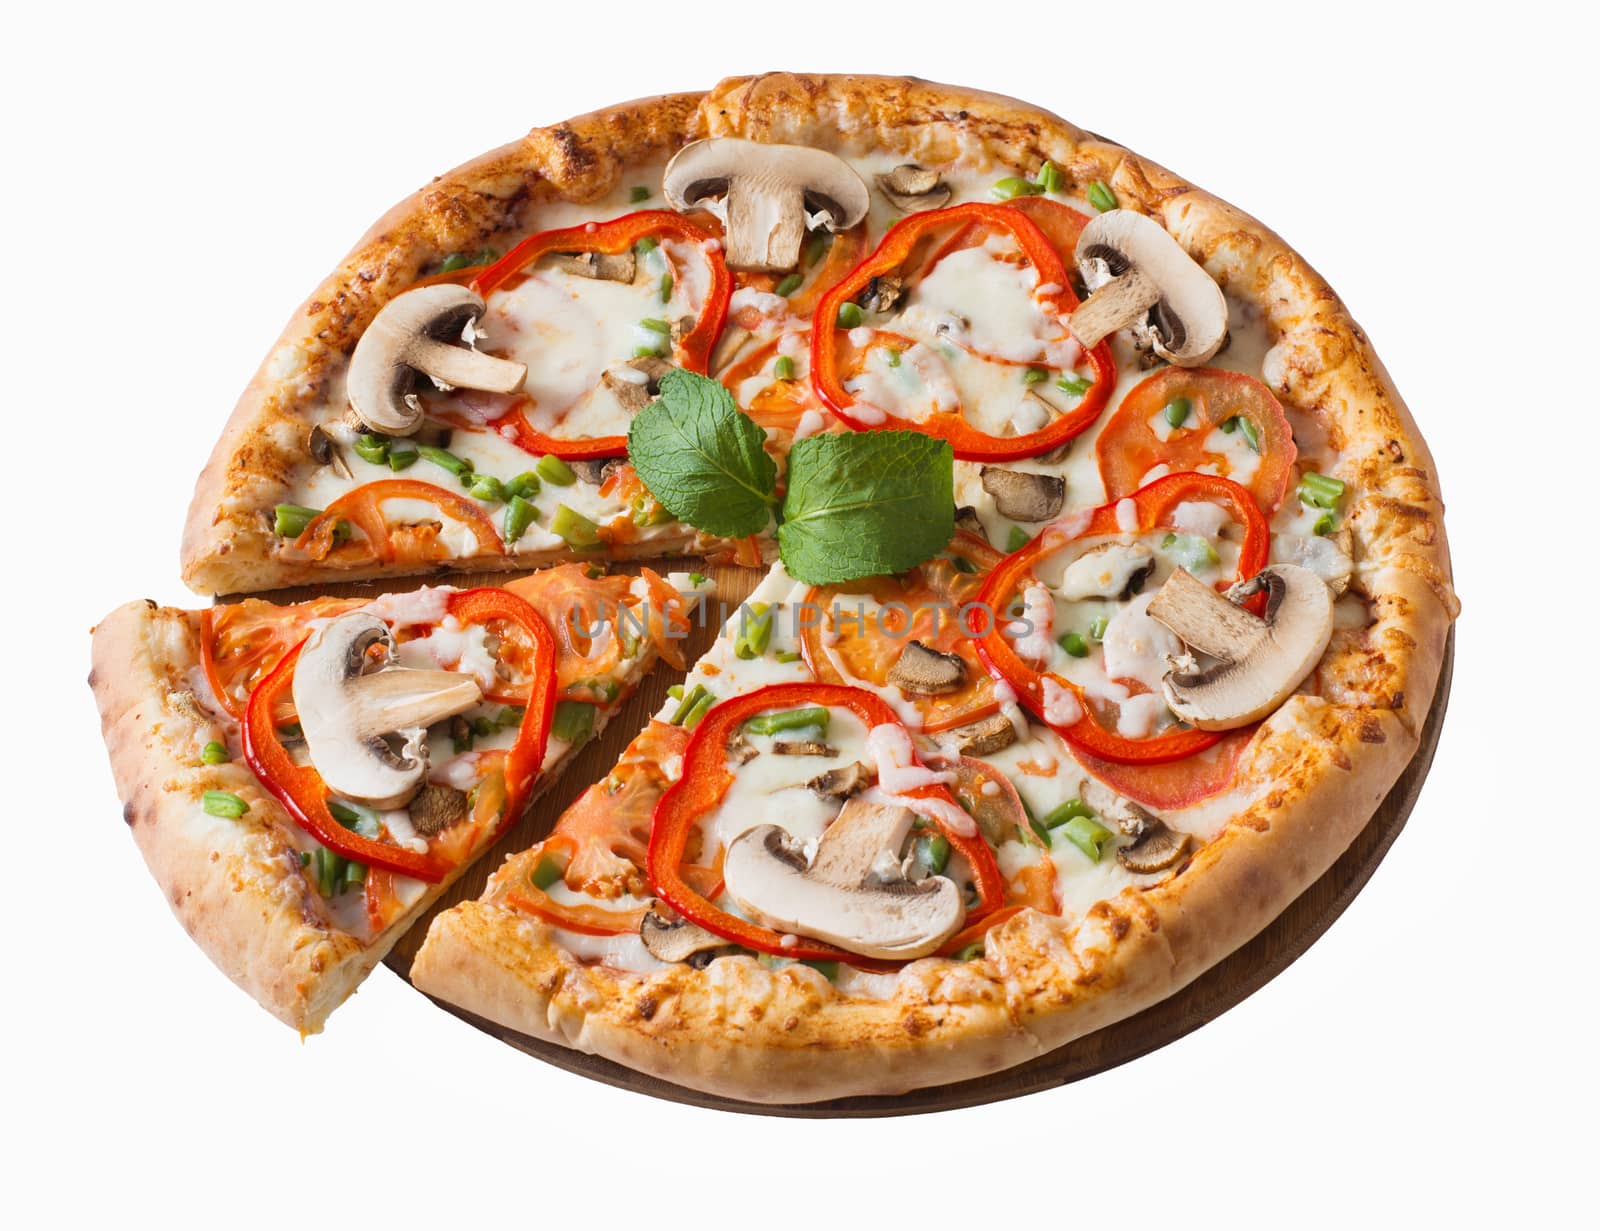 Tasty pizza with mushrooms and vegetables  isolated on white